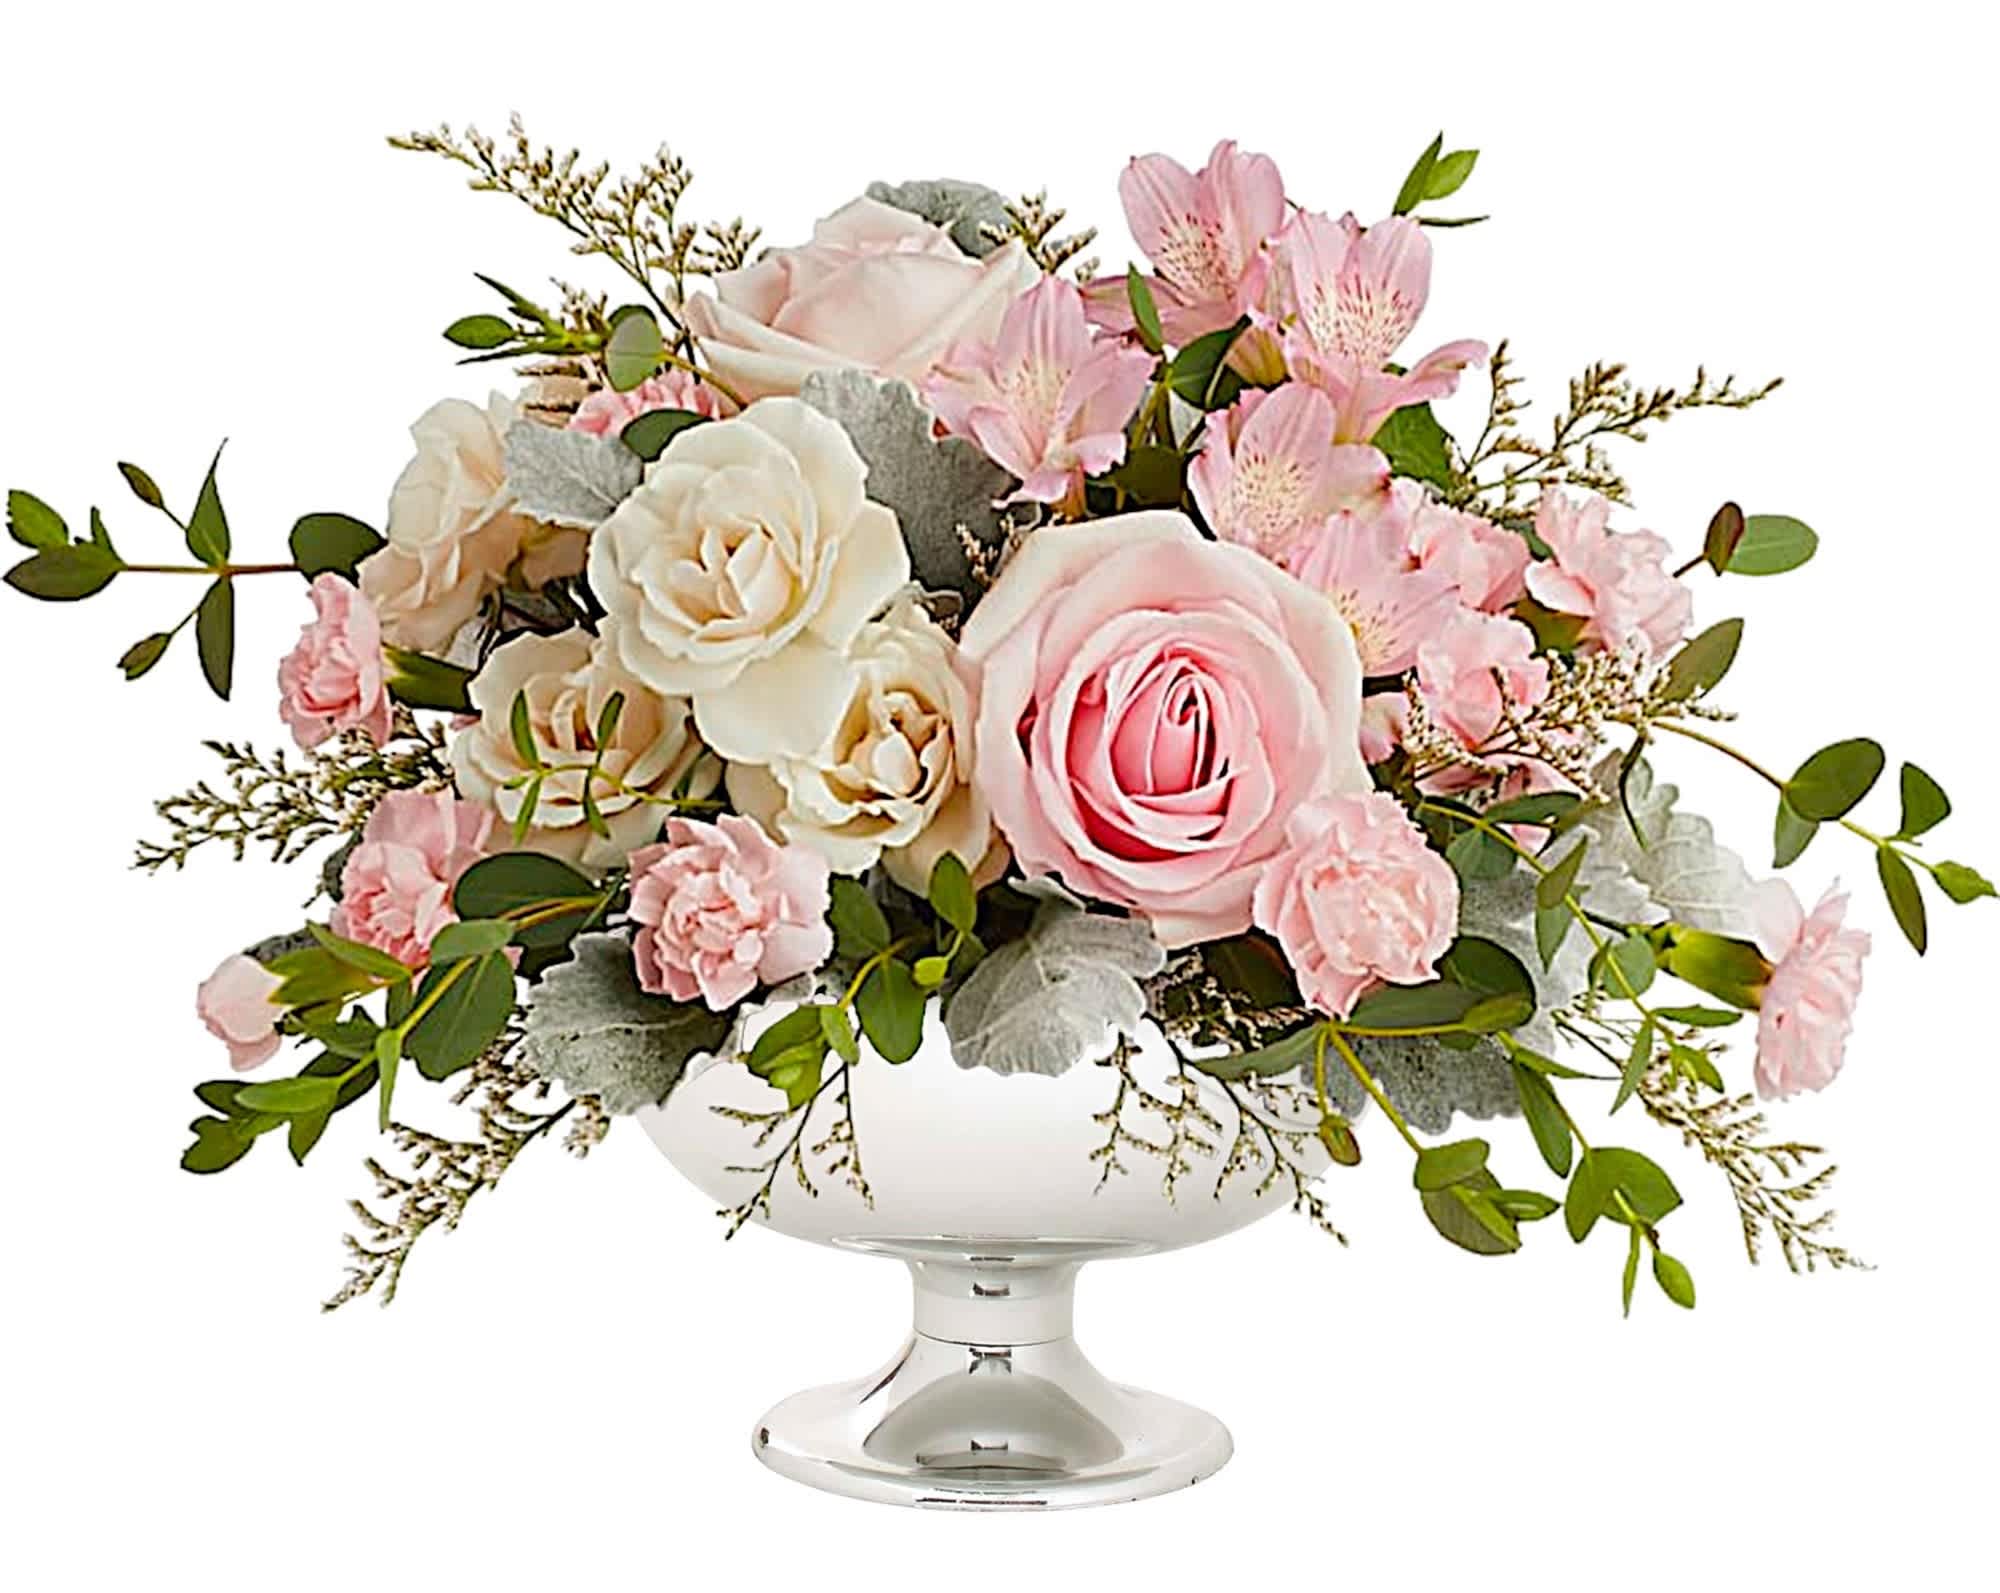 Rosy Skies - Illuminate love with embracing soft pastel shimmer and cradling an exquisite arrangement of vibrant pink flowers, a timeless expression of artistic beauty for any occasion.  DETAILS Embrace enchantment with the Rosy Skies arrangement, a delicate arrangement of light pink roses, crème spray roses, light pink alstroemeria, miniature pink carnations, and parvifolia eucalyptus, all in a silver cup which makes a radiant gift for any celebration.  FLORIST-TO-DOOR  Orientation: All-Around  BLOOM DETAILS Roses Spray Roses Mini-Carnations Alstroemerias Limonium Greenery  The Standard Arrangement is approximately 11&quot; H x 16&quot; W. The Deluxe Arrangement is approximately 11 1/2&quot; H x 17&quot; W. The Premium Arrangement is approximately 12 1/4&quot; H x 17&quot; W.  Designed by our award-winning florist designers.  HOW TO CARE FOR YOUR FLOWERS 1. Keep in a location without direct sunlight and away from extreme heat or cold. 2. Add water regularly to keep floral foam moist and mix in the flower food packet provided. 3. Trim the stems at an angle every other day. 4. As flowers/foliage wilt, remove &amp; discard  Please Note: The arrangement pictured reflects an original design for this product. While we always do our best to follow the original flower recipe, the exact flower or container is sometimes unavailable. We may replace items of equal or greater value to deliver the freshest flowers possible while keeping the style &amp; color palette. We assure you that we will create a beautiful, fresh flower arrangement with only the best quality flowers to keep you as a loyal customer.  How to place an order? We have several options. 1. You can place an order directly on this secure website... OR 2. You can call in your order by dialing: (323) 262 - 9238... OR 3. You can visit our store (appointment recommended 323.262.9238)  NINFA'S FLOWERS 2405 WHITTIER BLVD. LOS ANGELES, CA. 90023  ATTENTION: *Please note that on busy holidays, Valentine's Day, and Mother's Day, we cannot verify if the recipient received the flowers until the following day because our drivers don't turn in their signature delivery tablets until the following day. You can verify delivery on the website after 10:00 pm, call 323.262.9238 the following day after 10:00 am, or contact the recipient directly if you haven't received a call from them. Thank you for your patience and understanding.